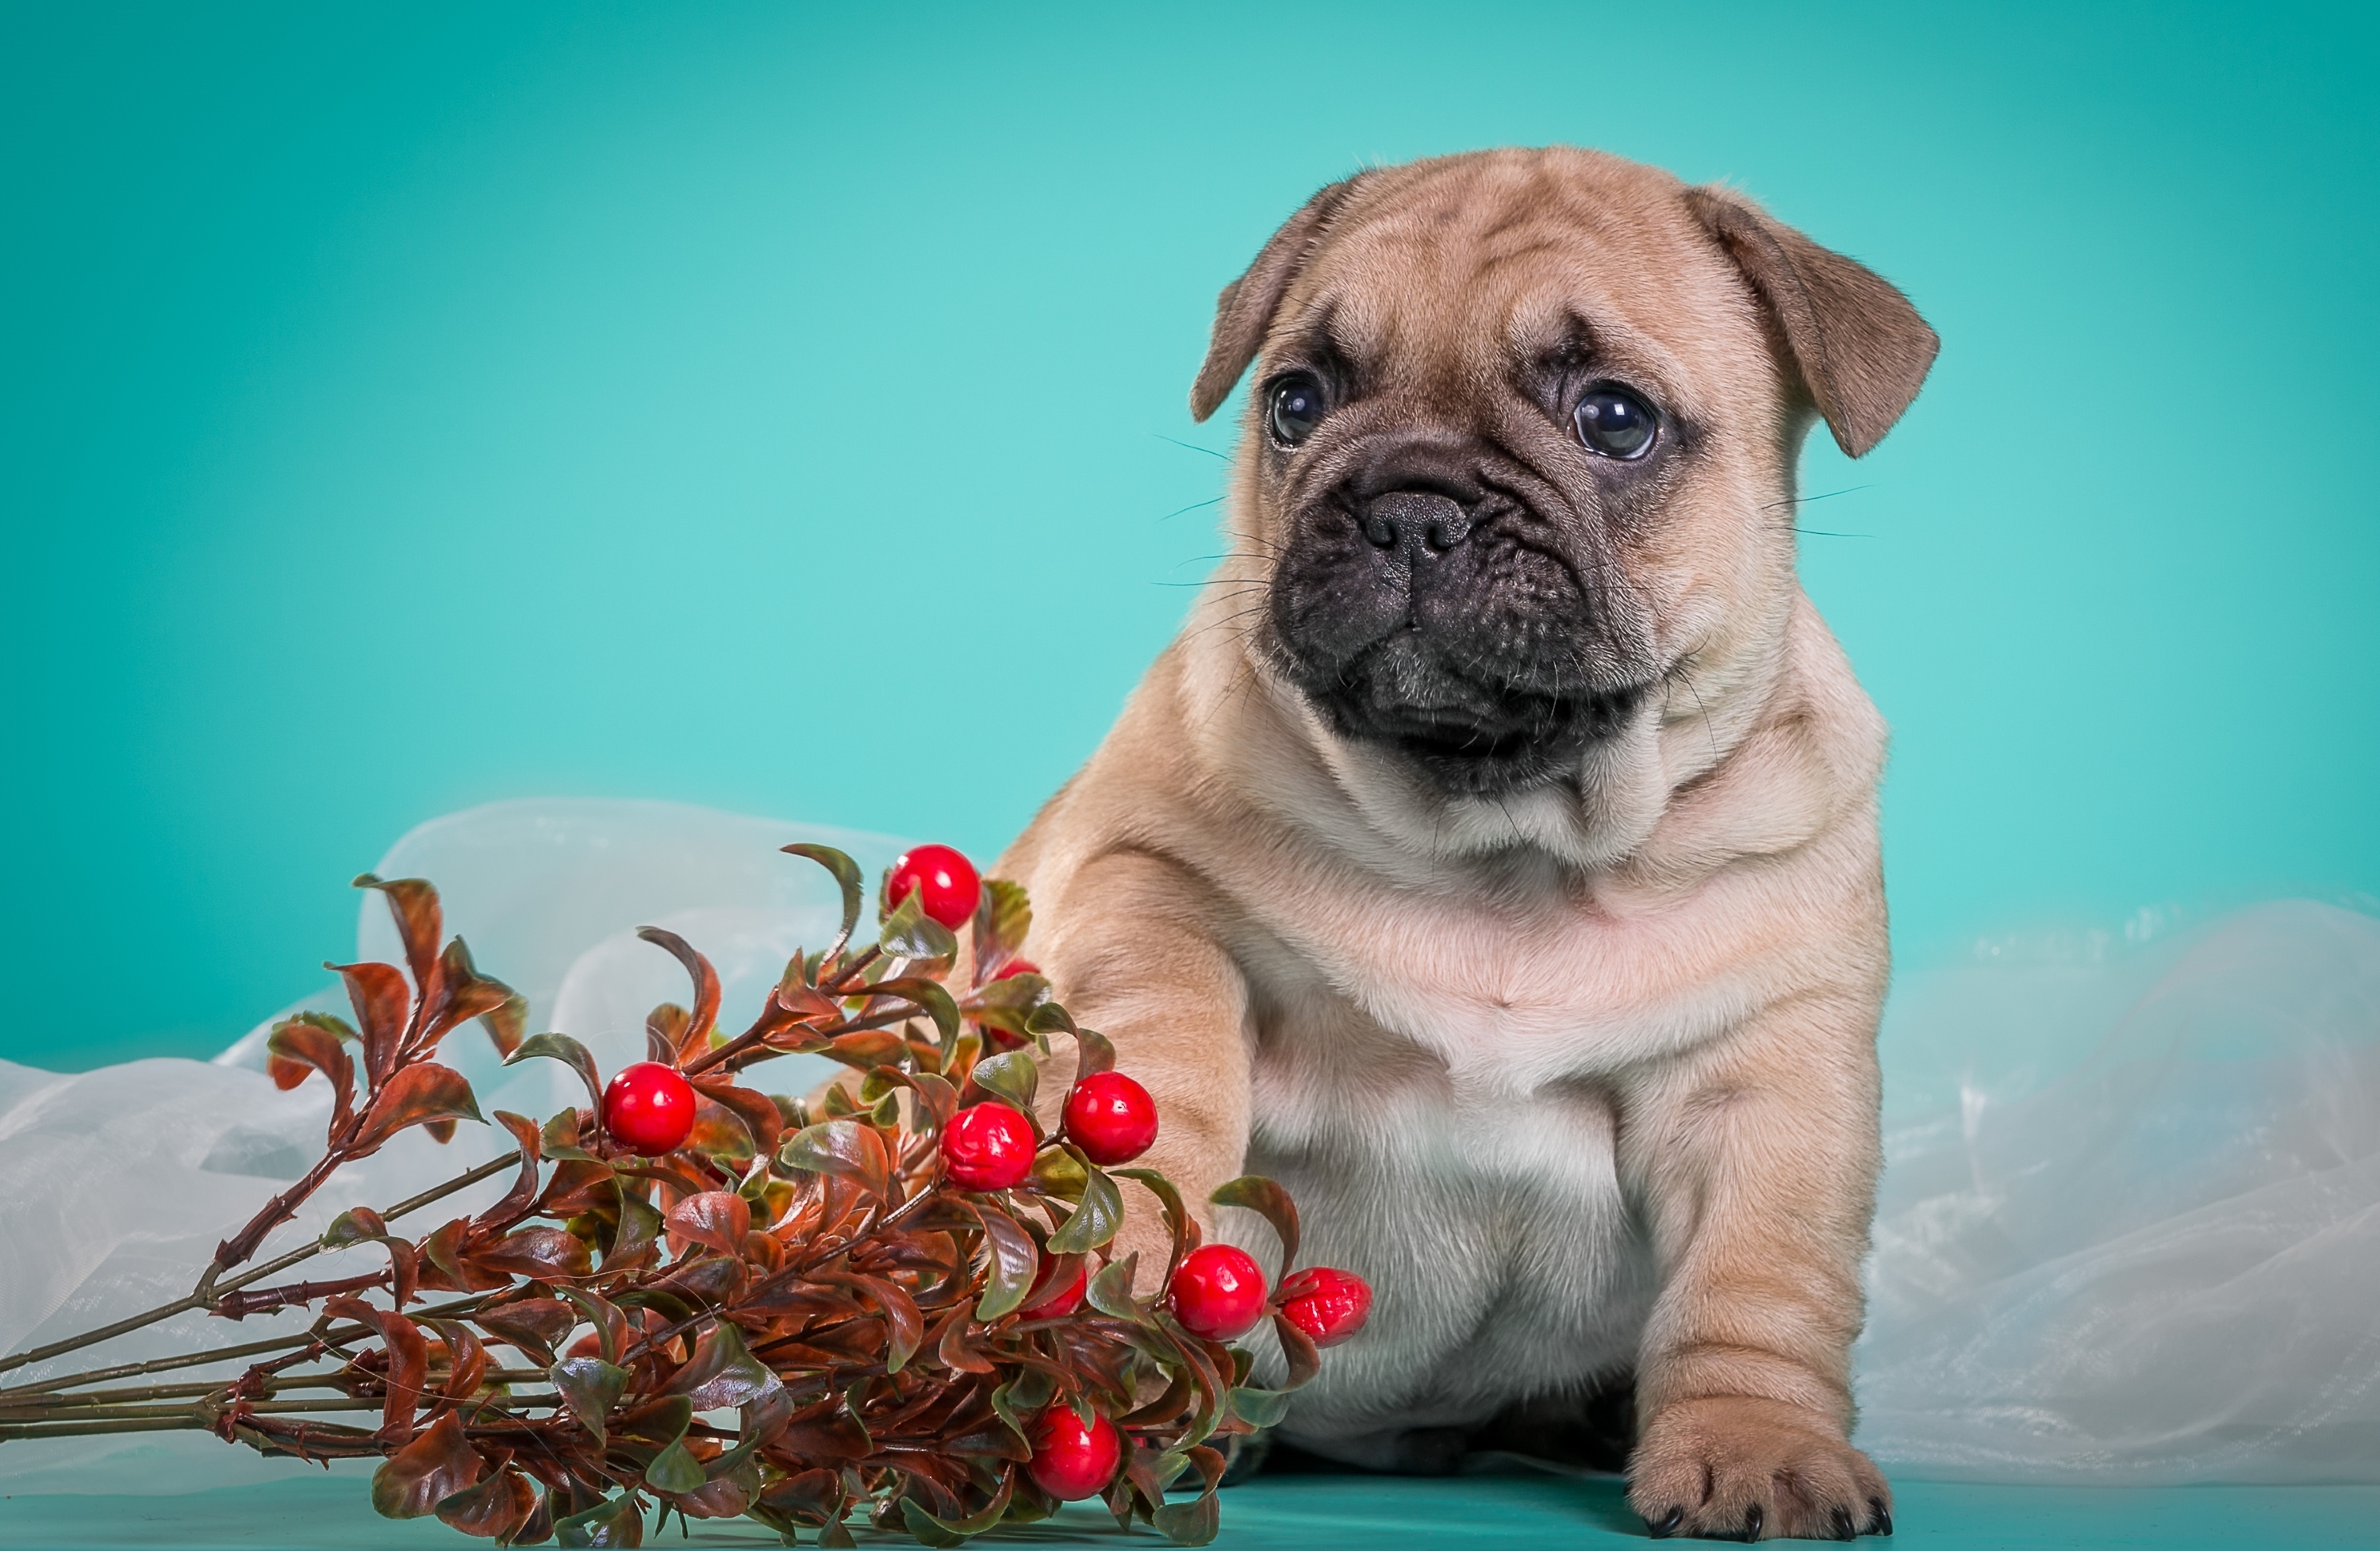 Free download Wallpaper french bulldog dog puppy cute cranberries wallpapers dog [1680x1050] for